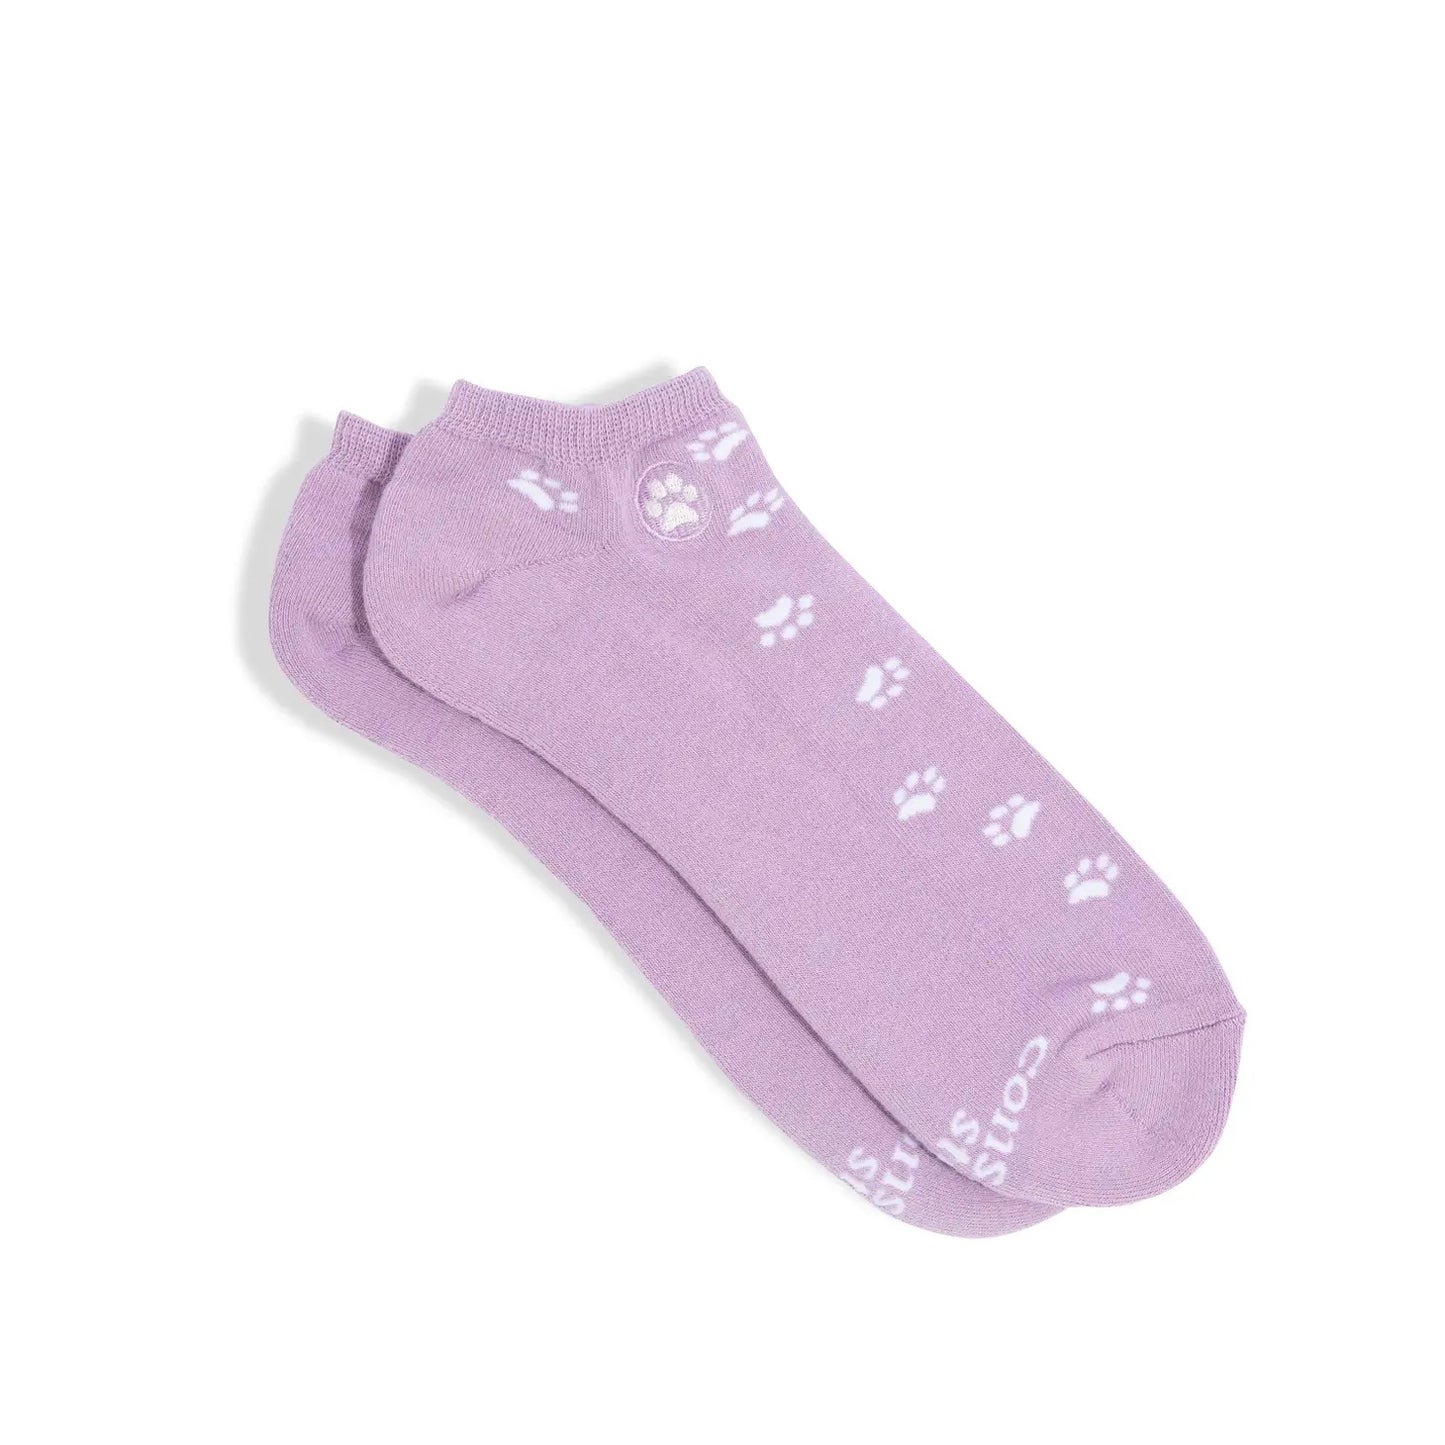 Conscious Step, Unisex Ankle Socks that Save Dogs - Lavender Paws